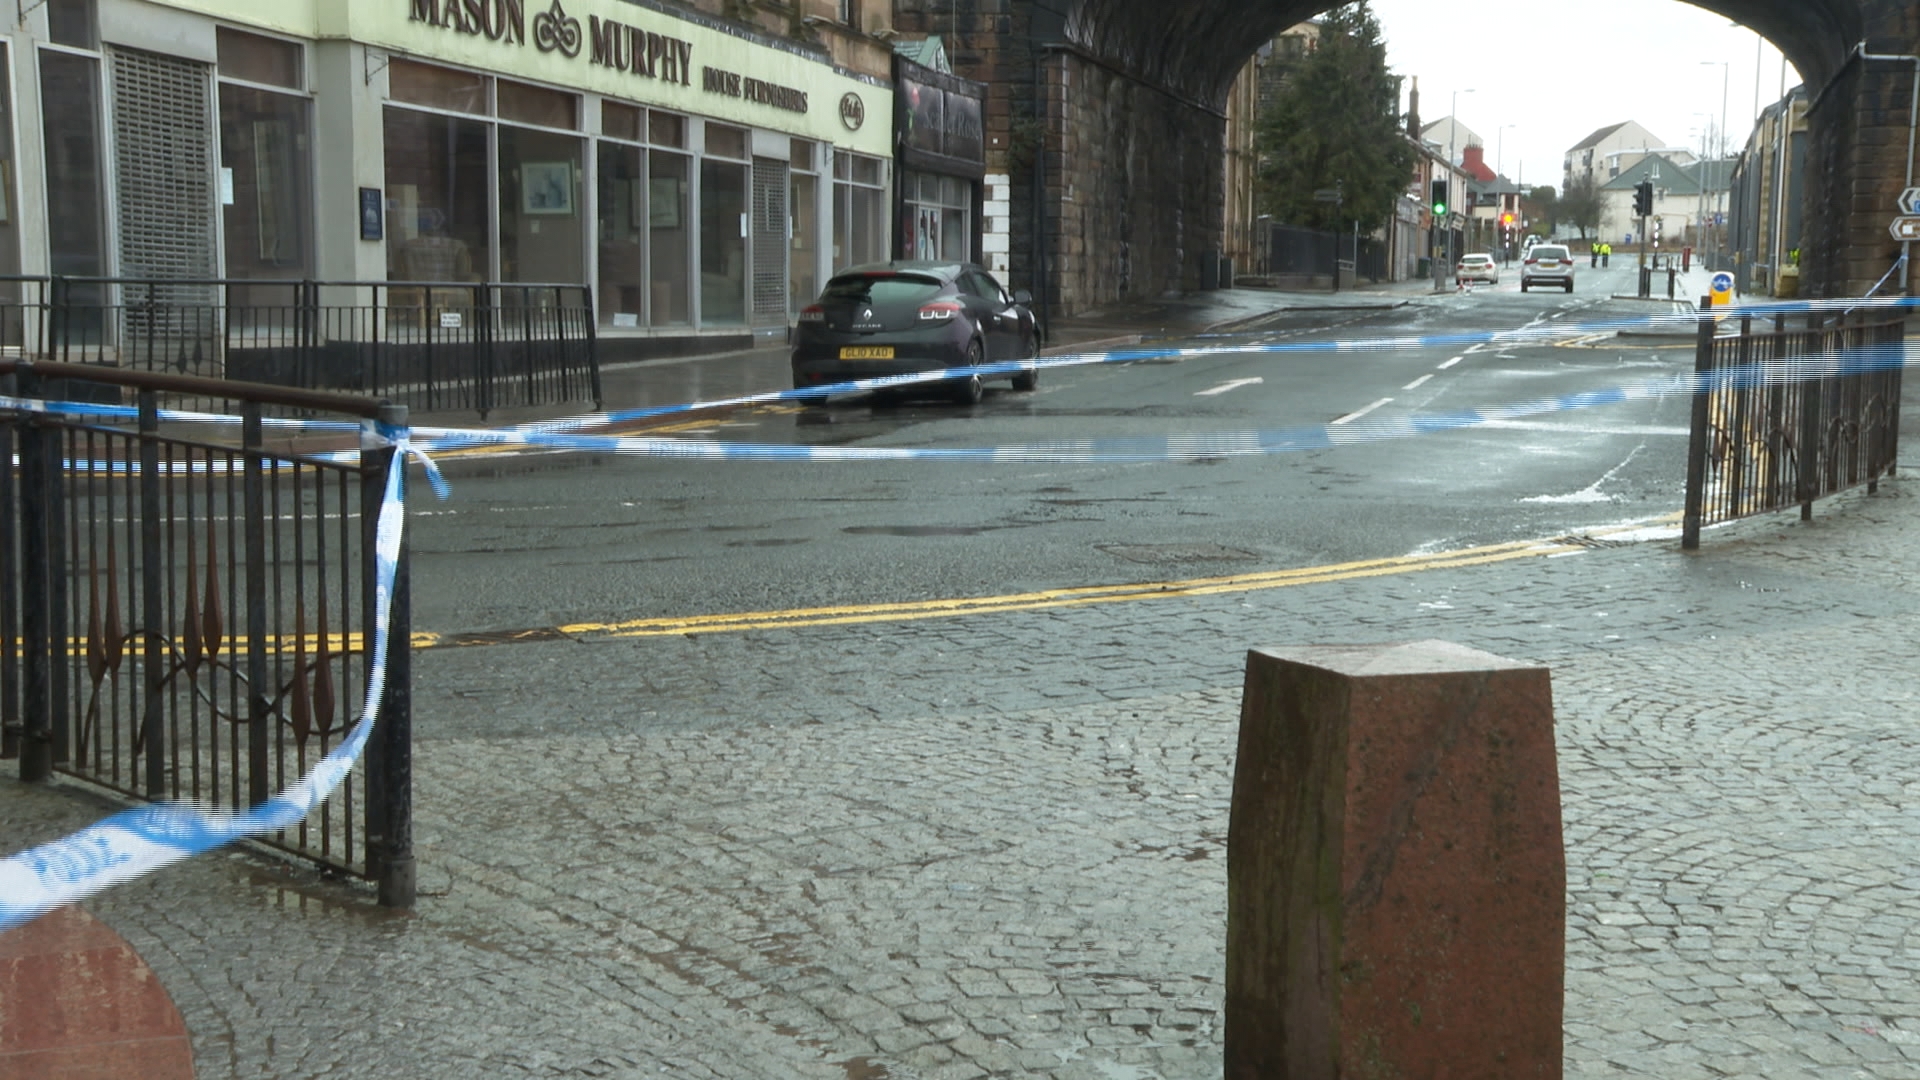 Parts of Kilmarnock town centre remained closed off on Friday.